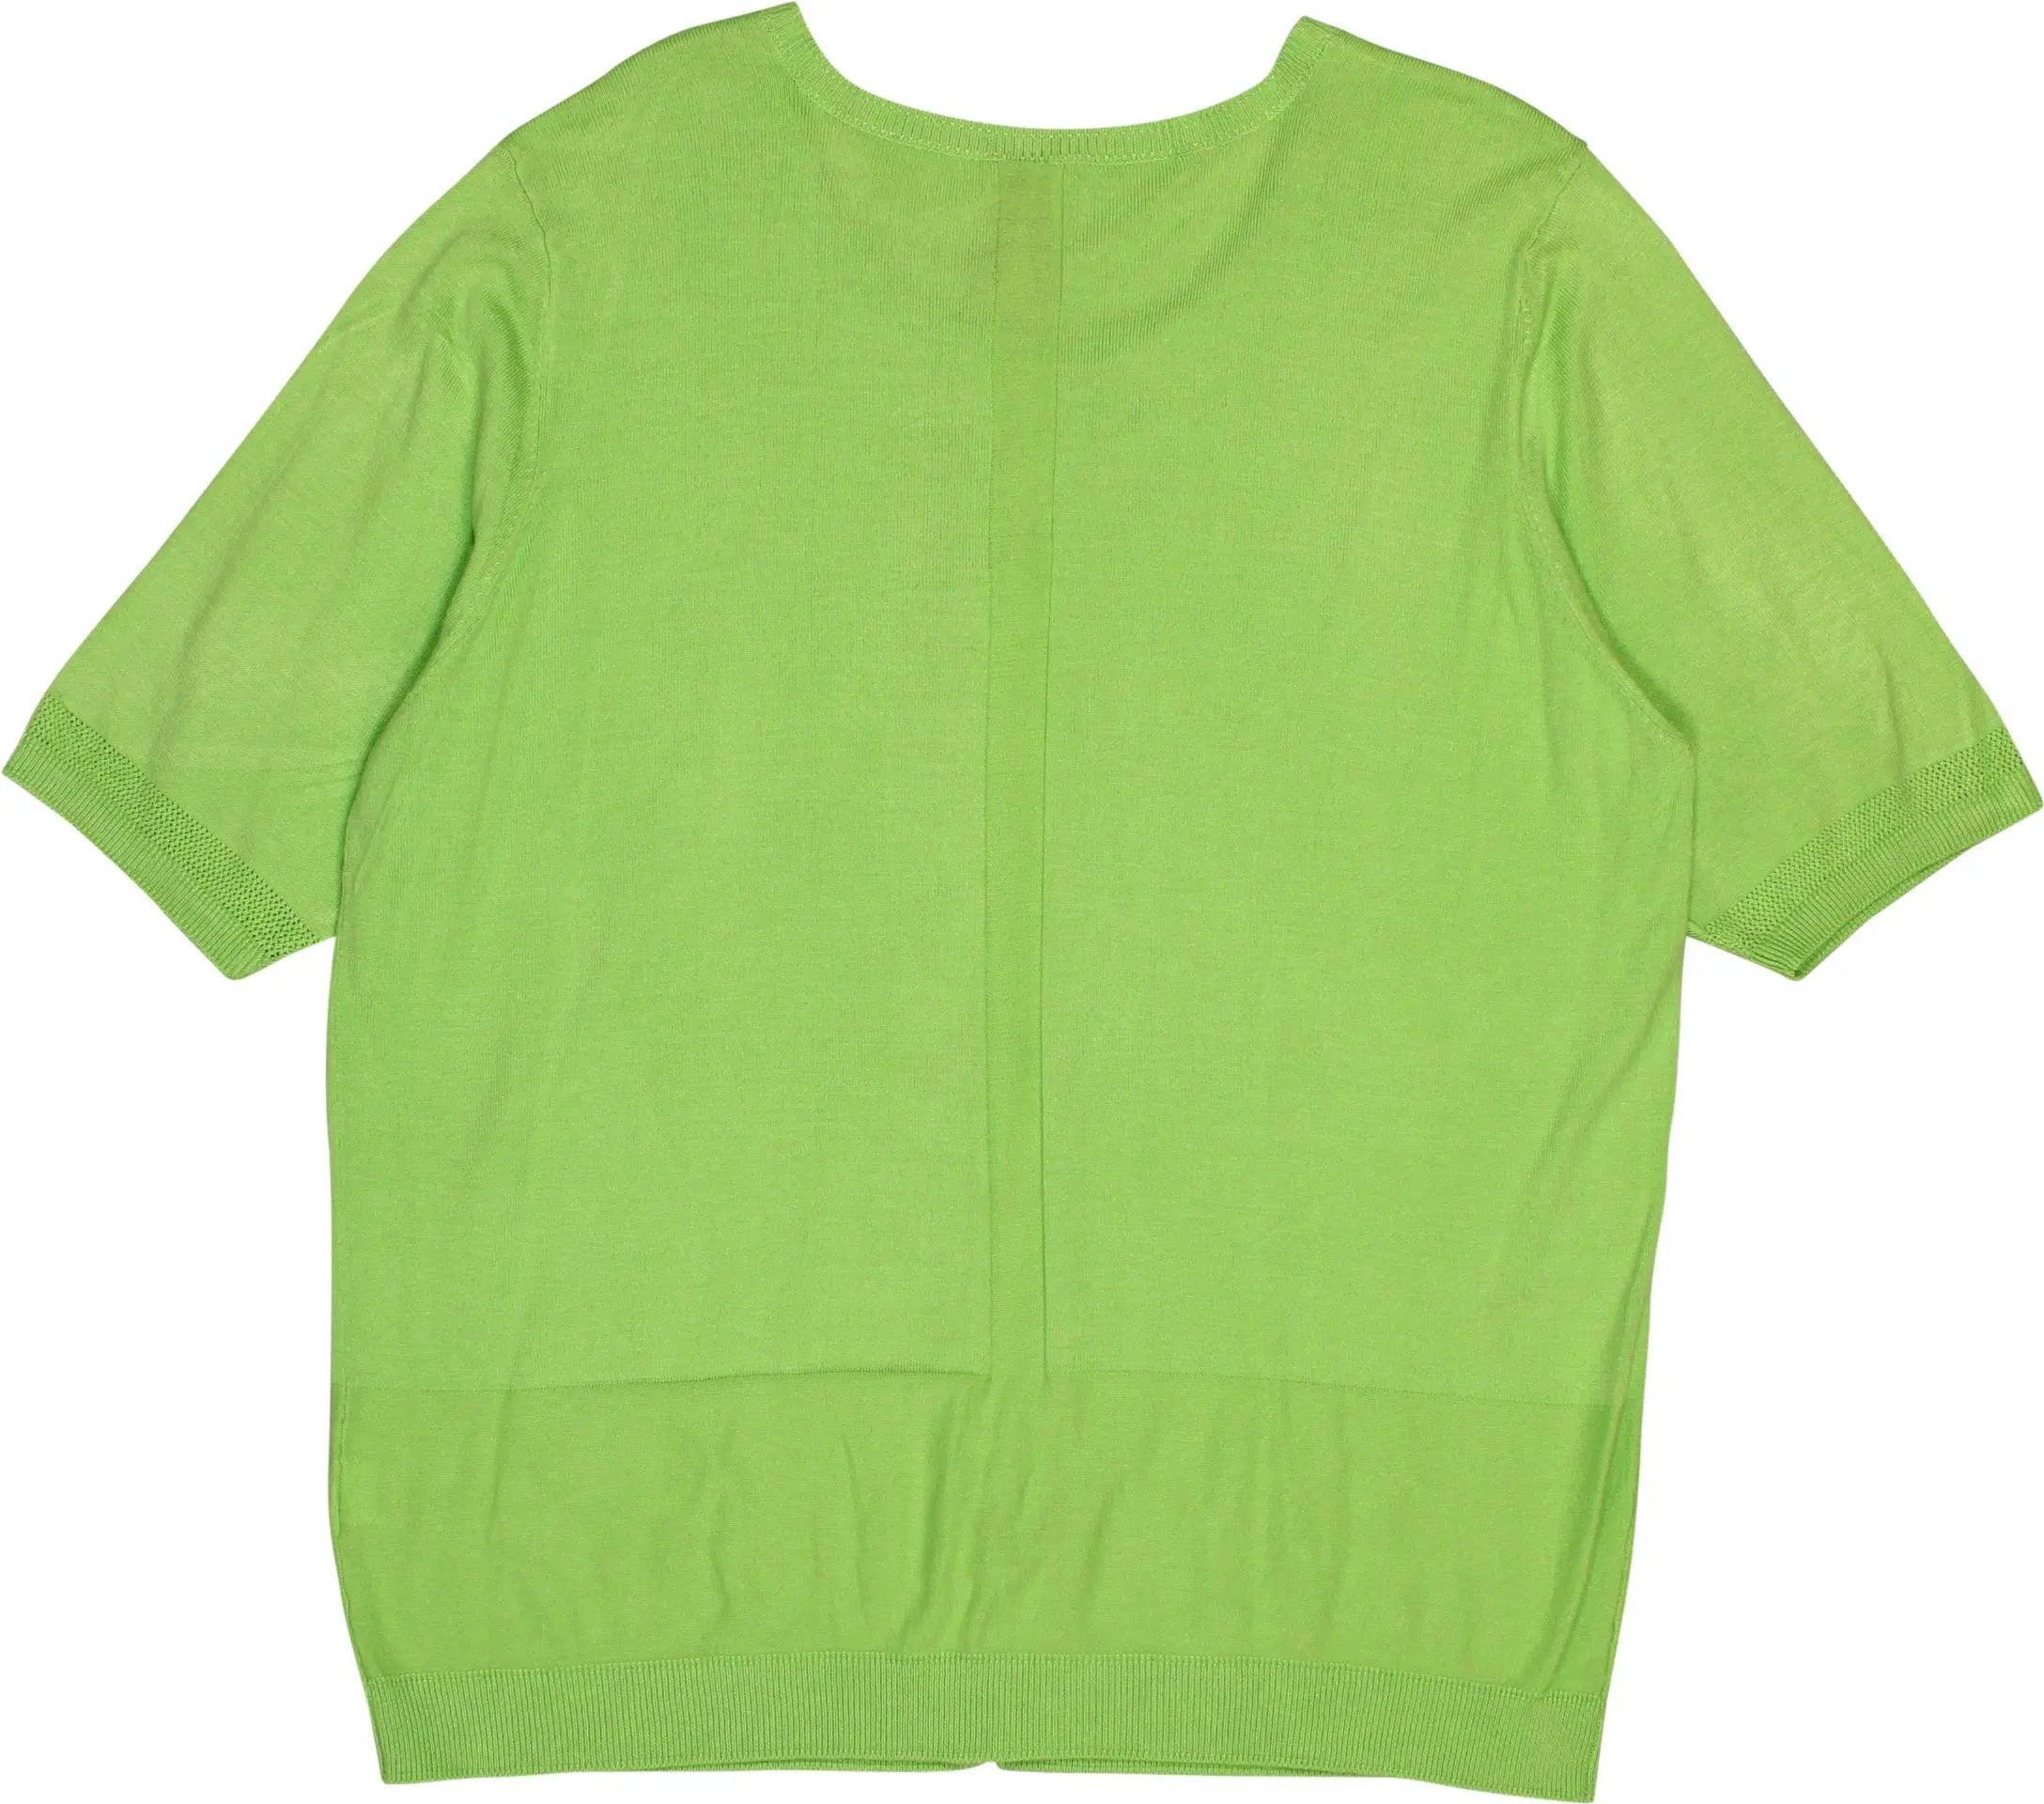 Miss Etam - Bright Green Top- ThriftTale.com - Vintage and second handclothing